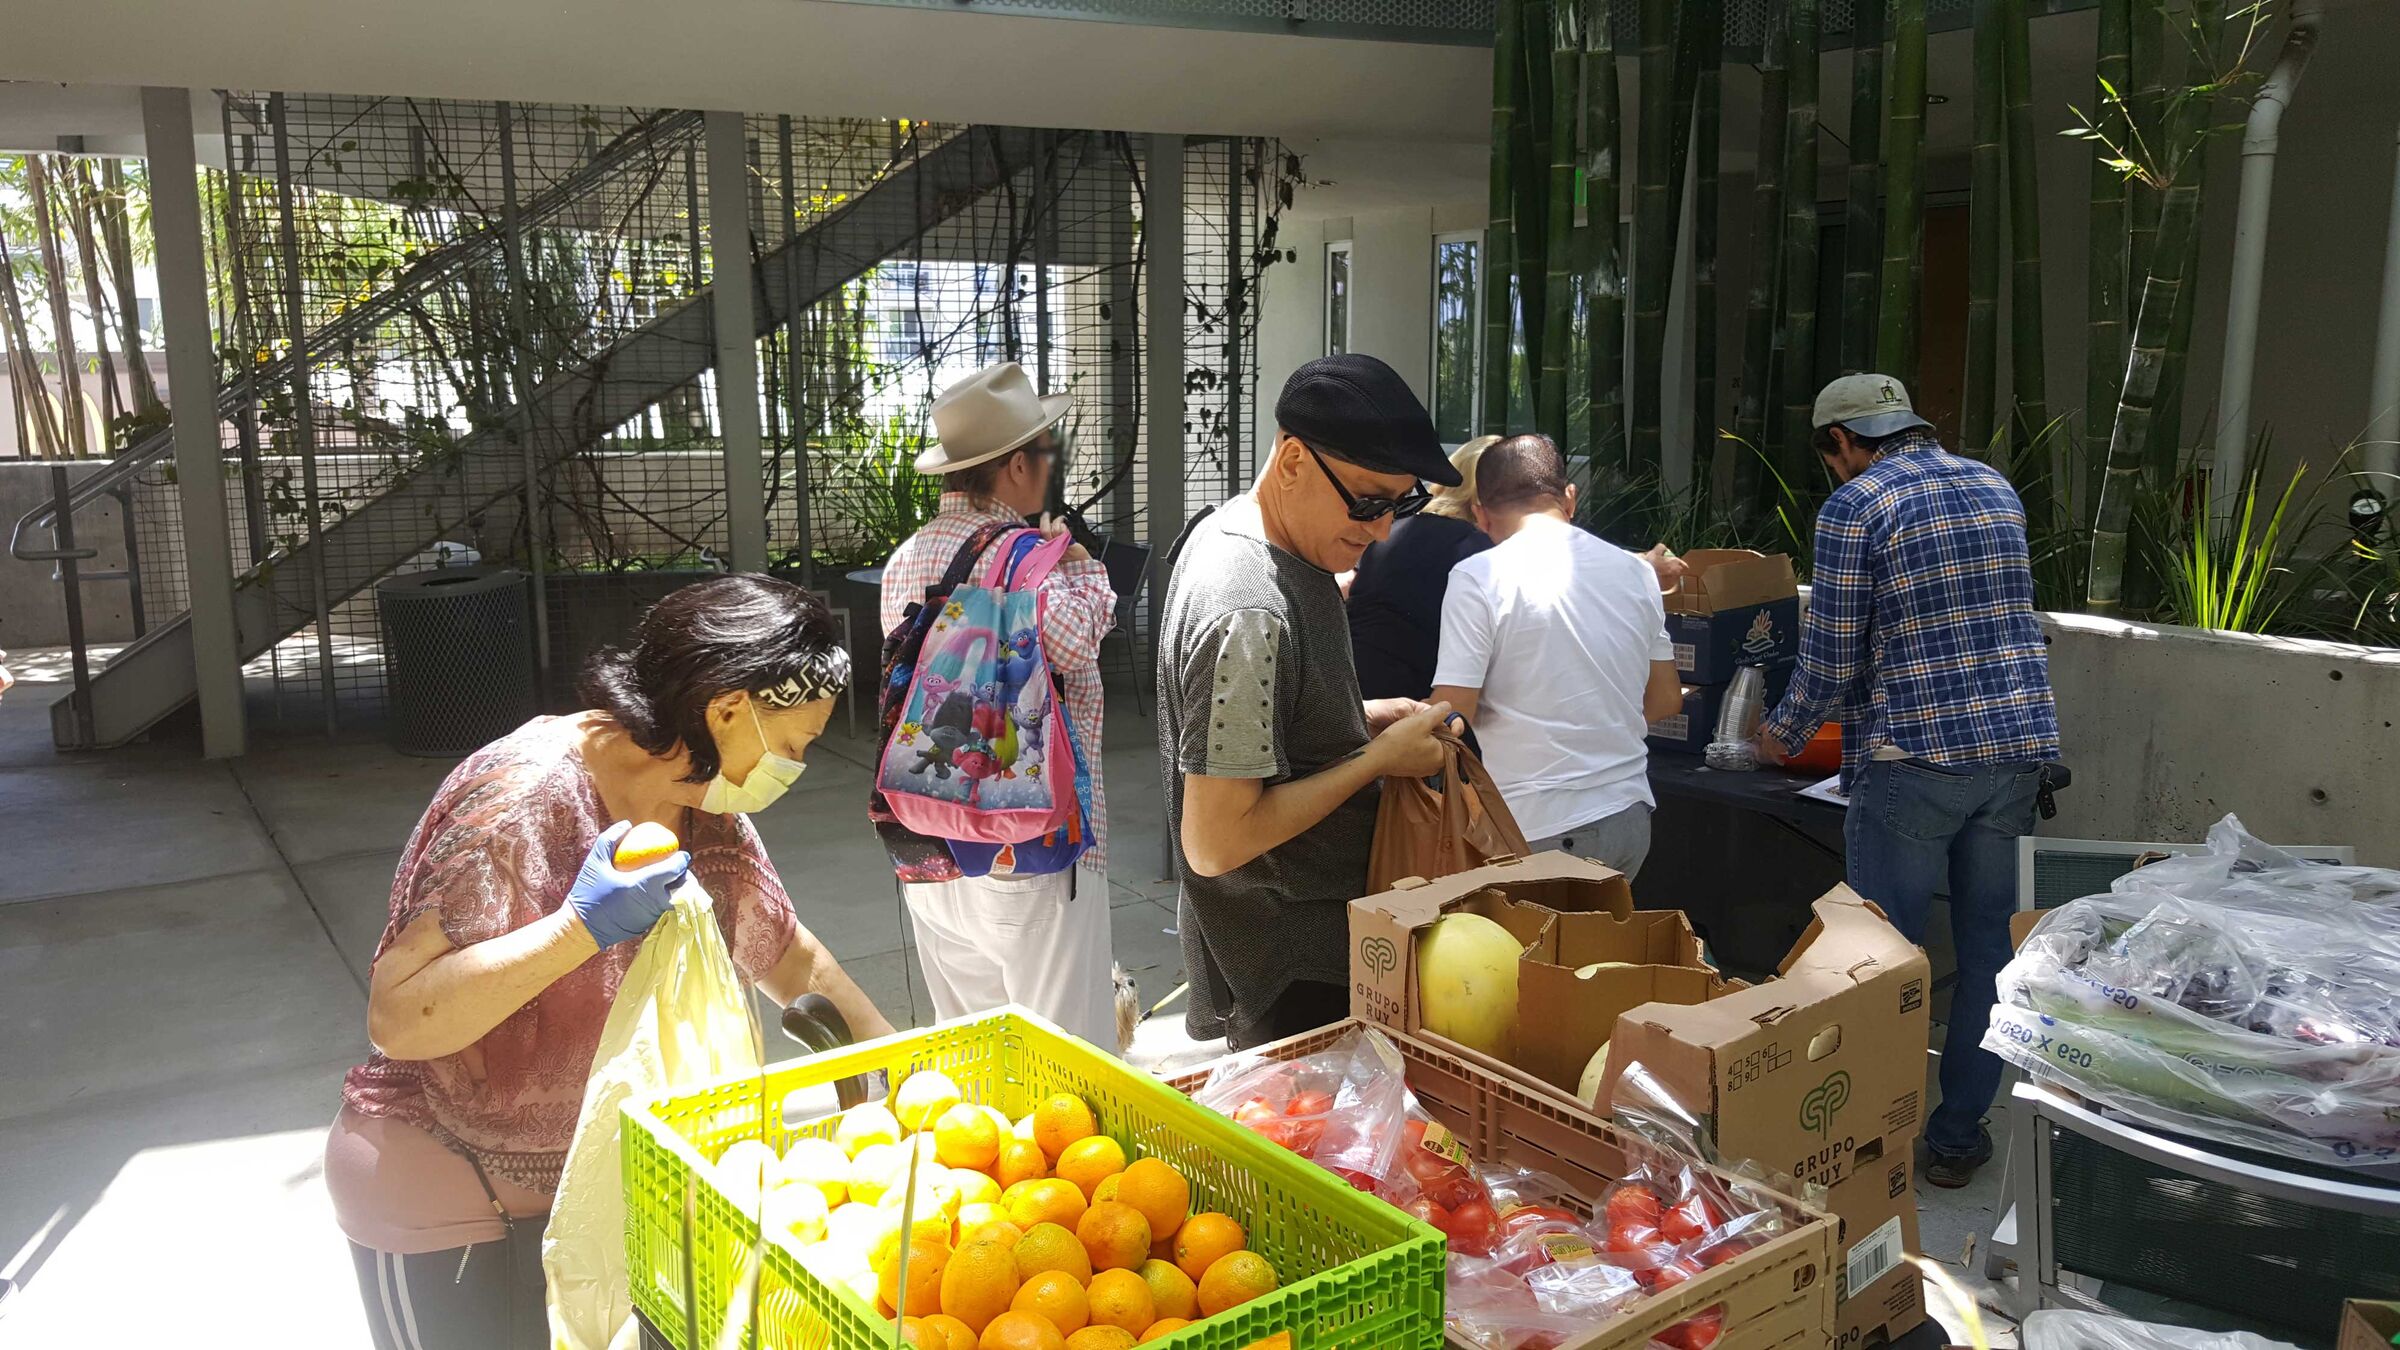 Residents at Courtyard at La Brea participating in Seeds of Hope